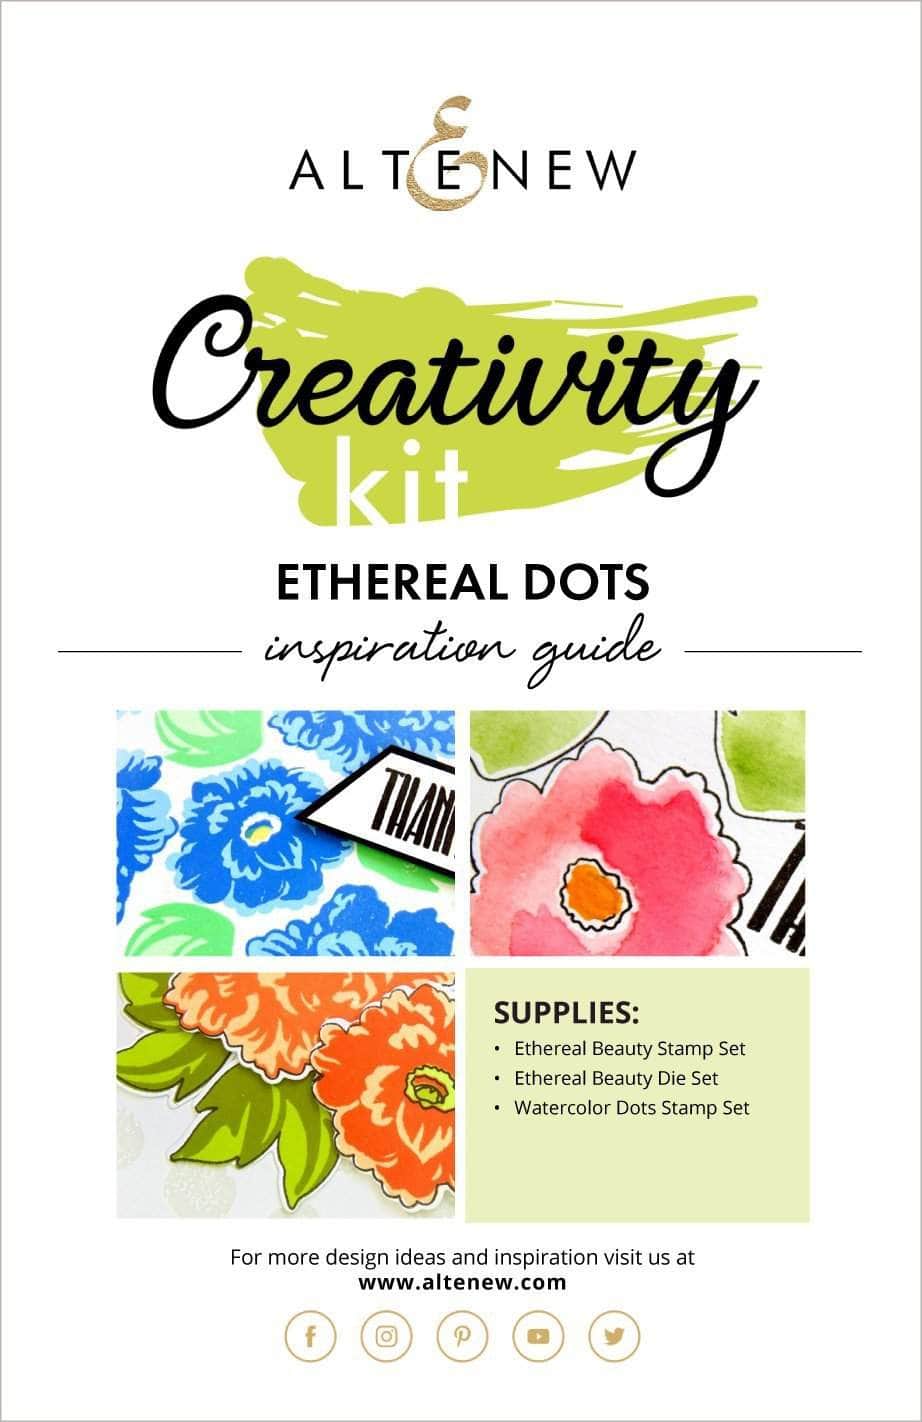 Printed Media Ethereal Dots Creativity Kit Inspiration Guide